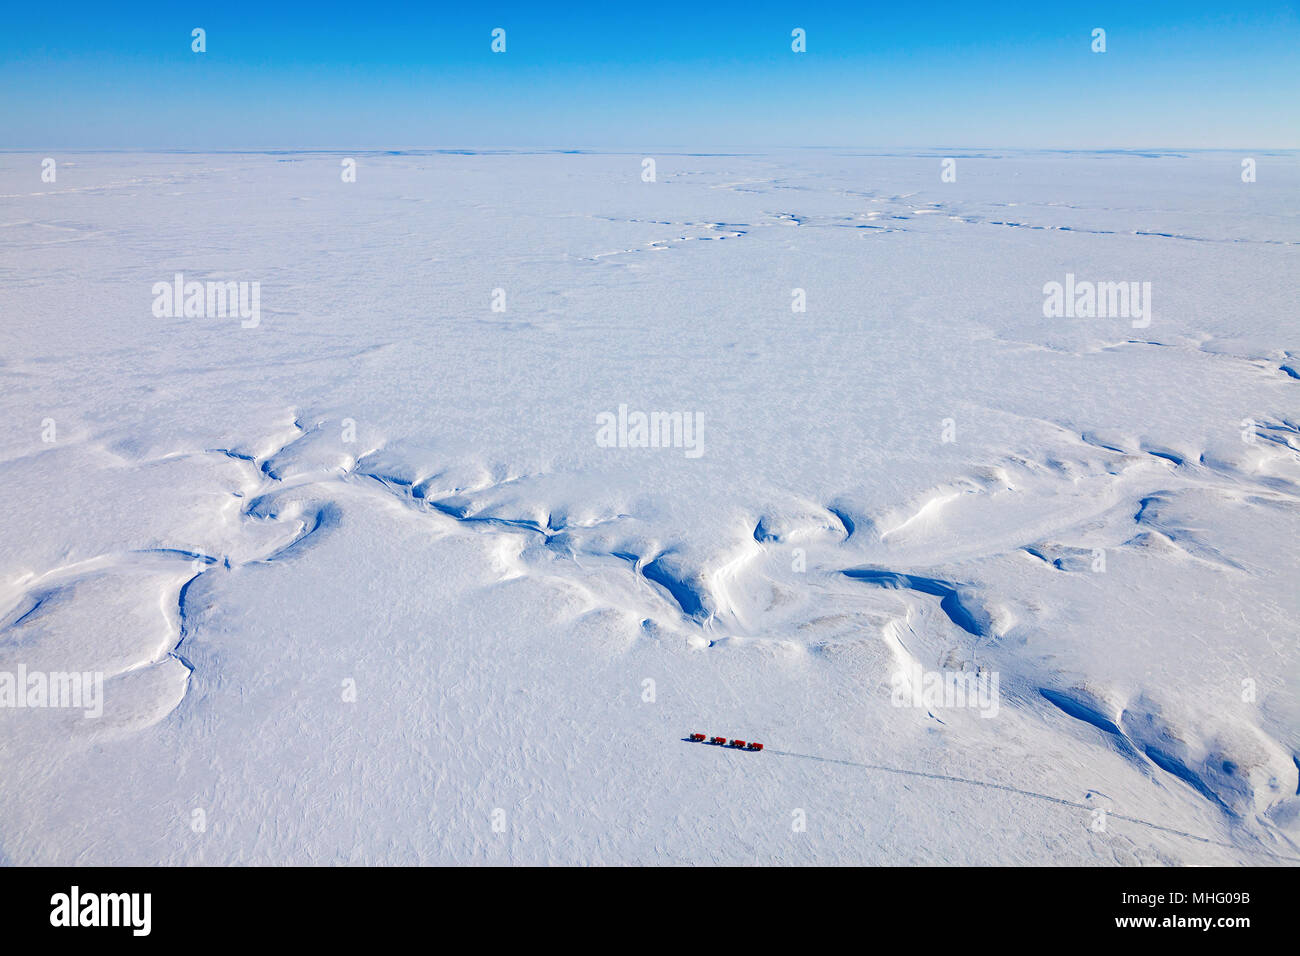 Yamal region, Russia - April 13, 2017: Aerial view of the Group of seismic vibrators in winter tundra of Yamal peninsula during research expedition. S Stock Photo